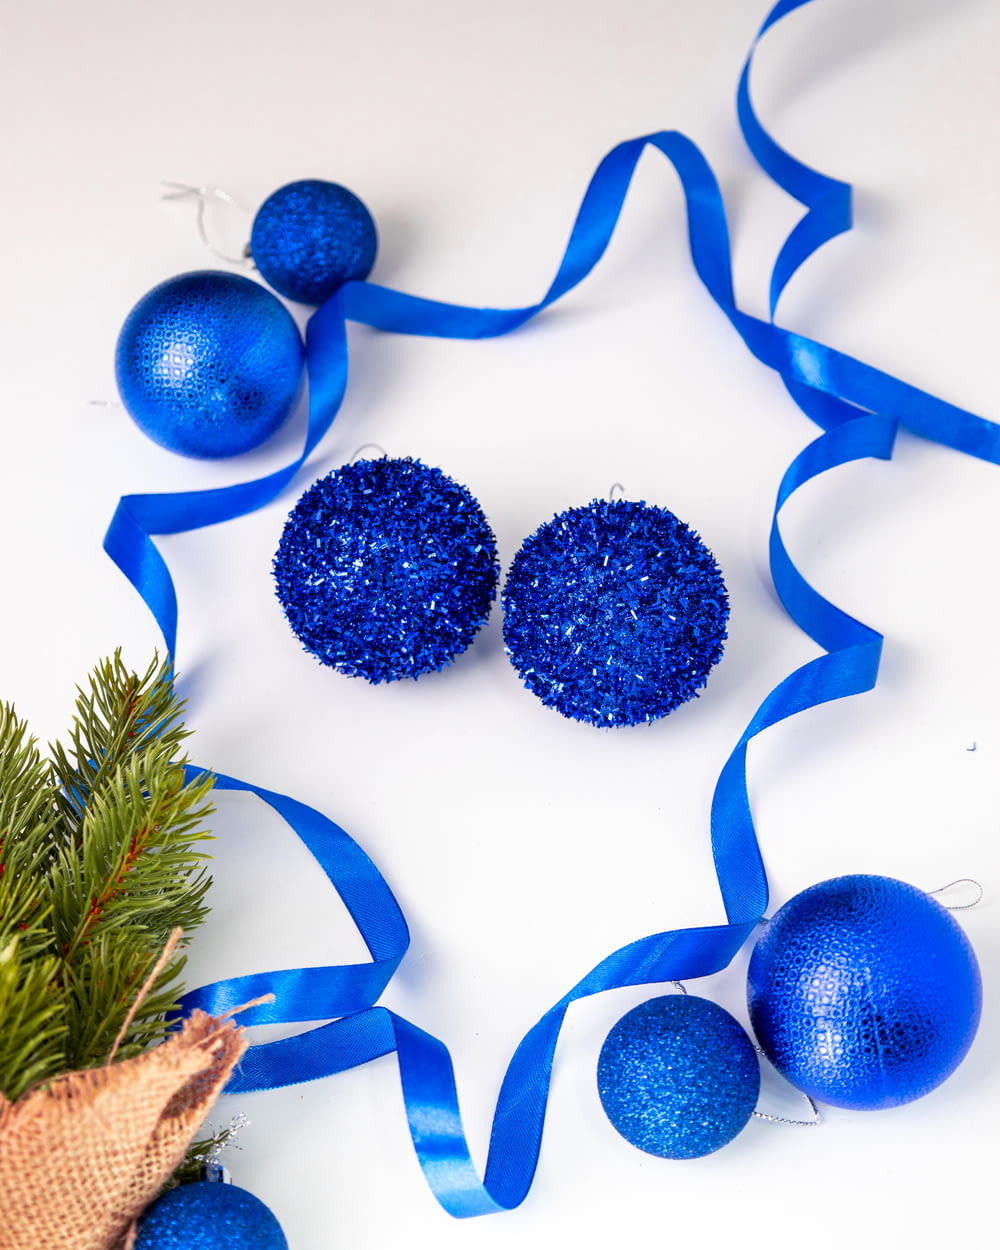 a blue christmas ornament and two blue balls on a white background